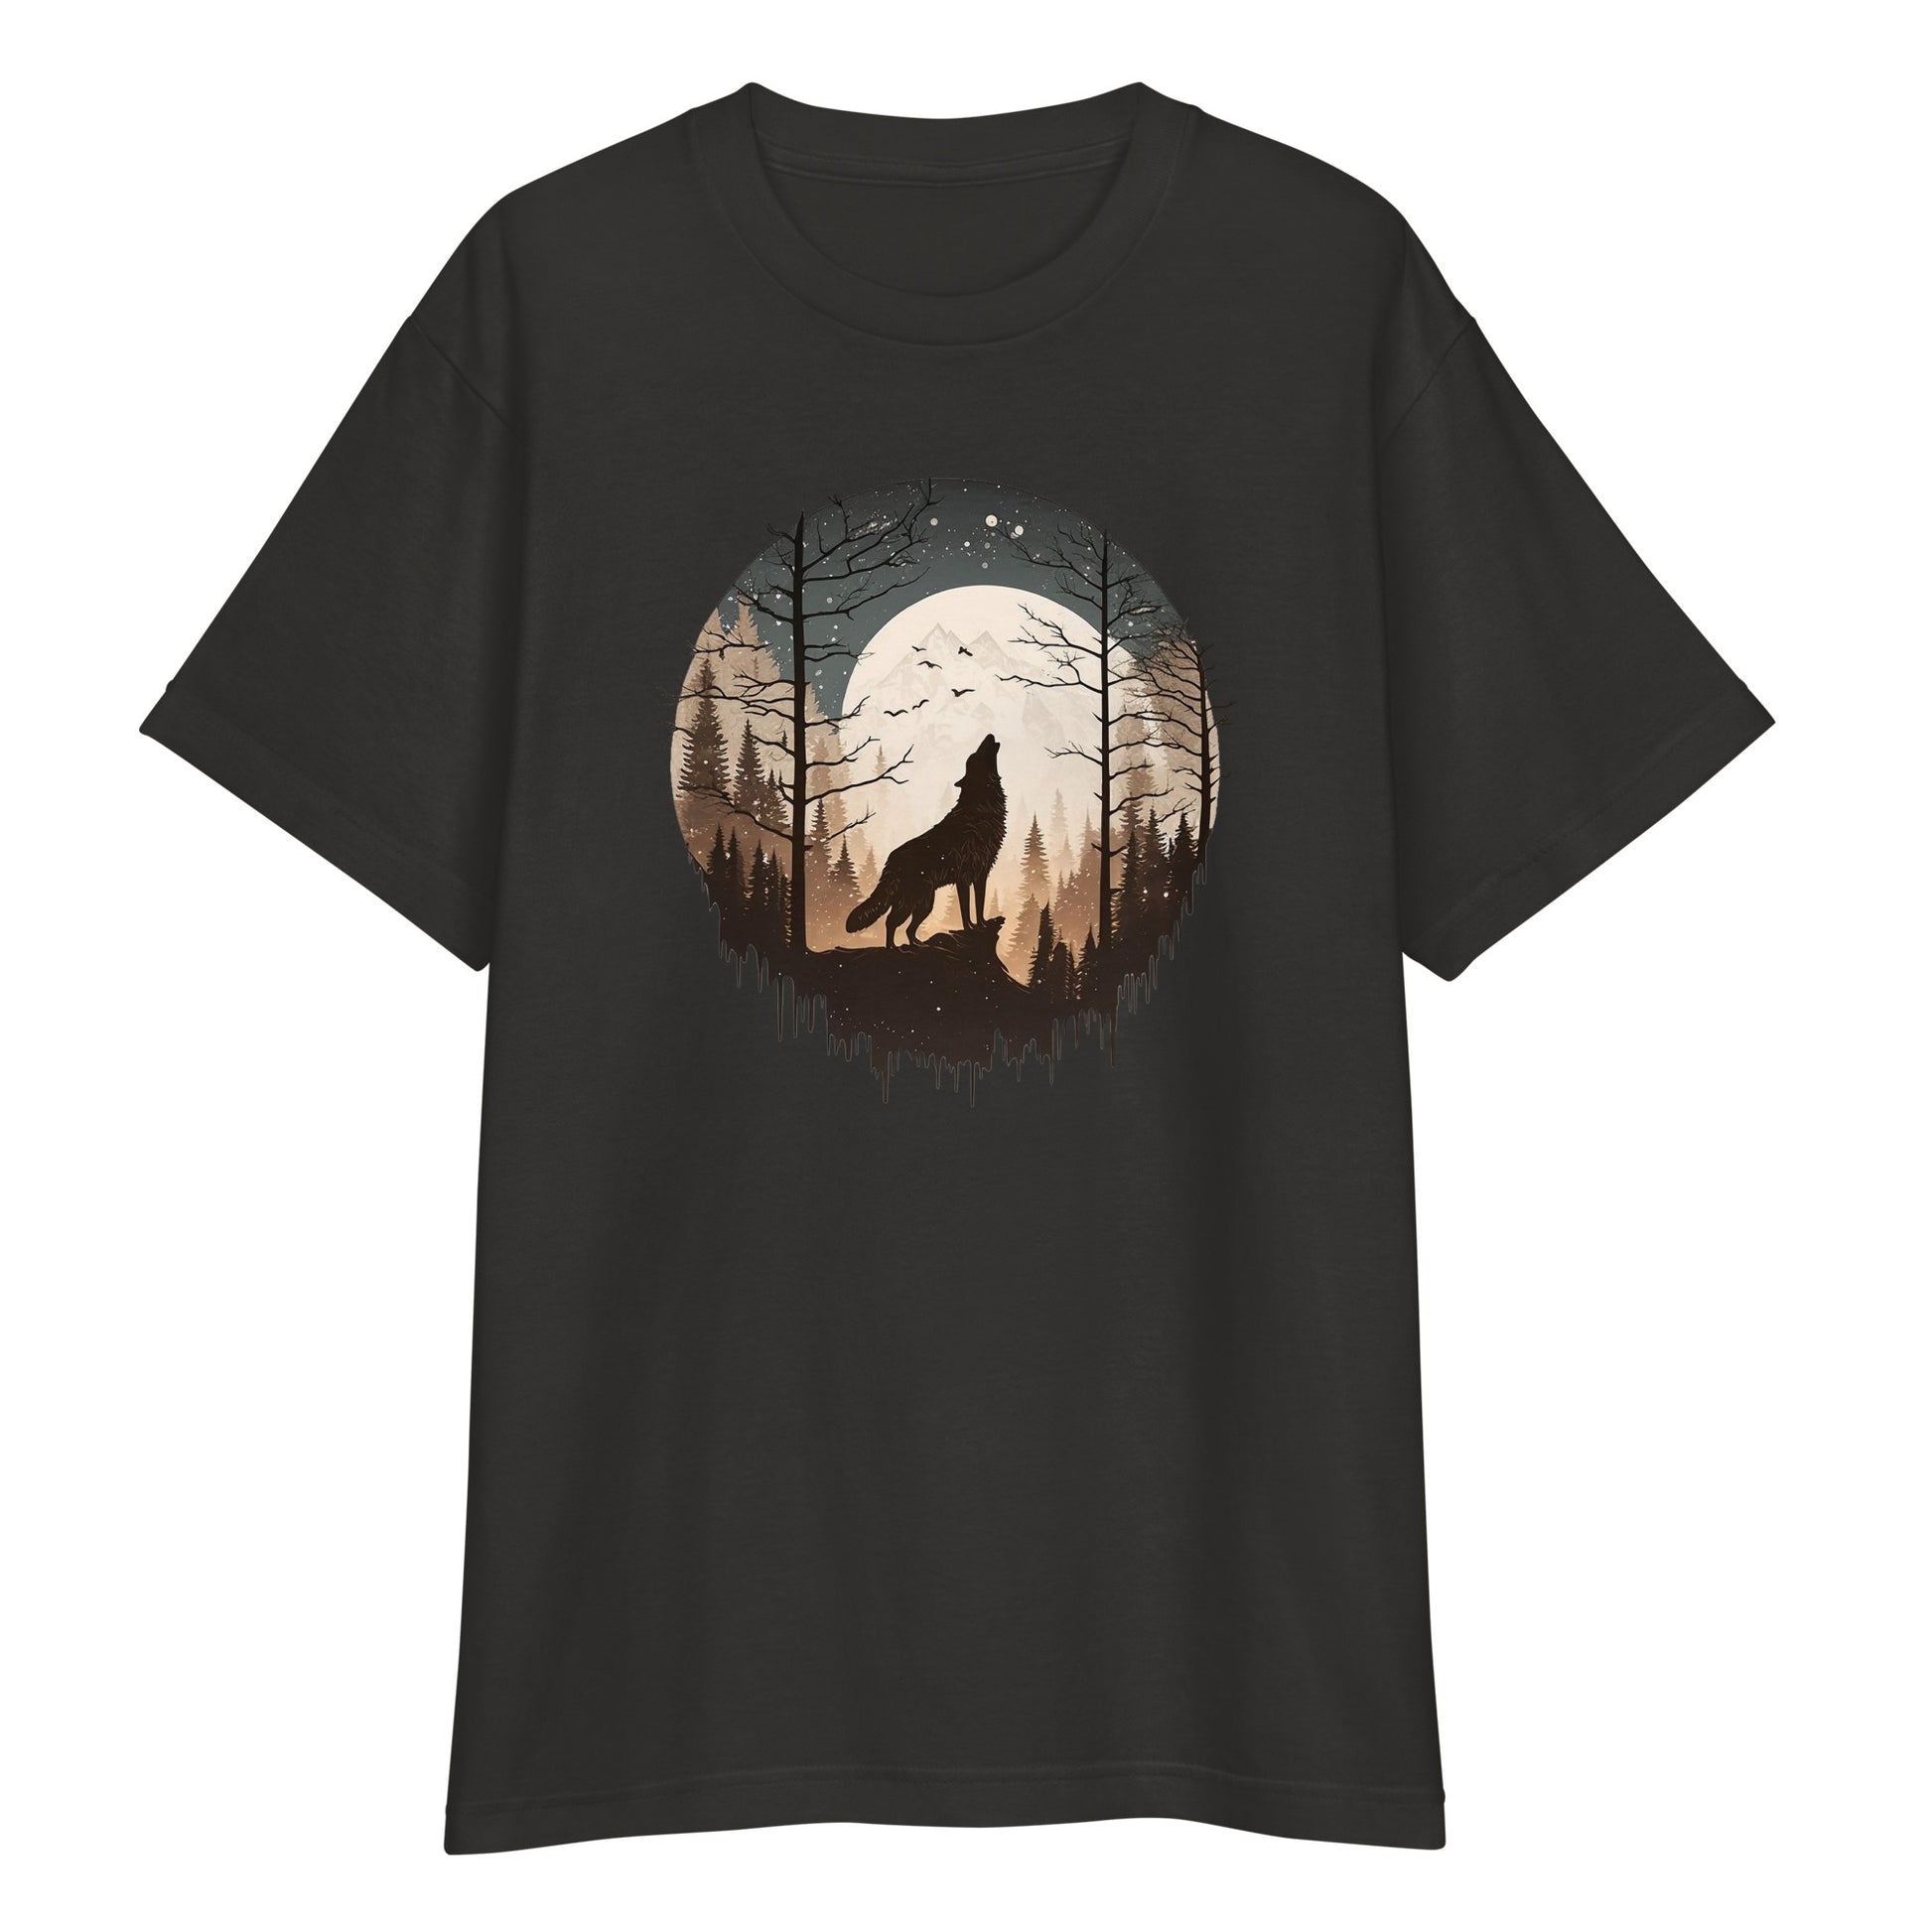 Dark Gray High Quality Tee - Front Design with a Howling Wolf